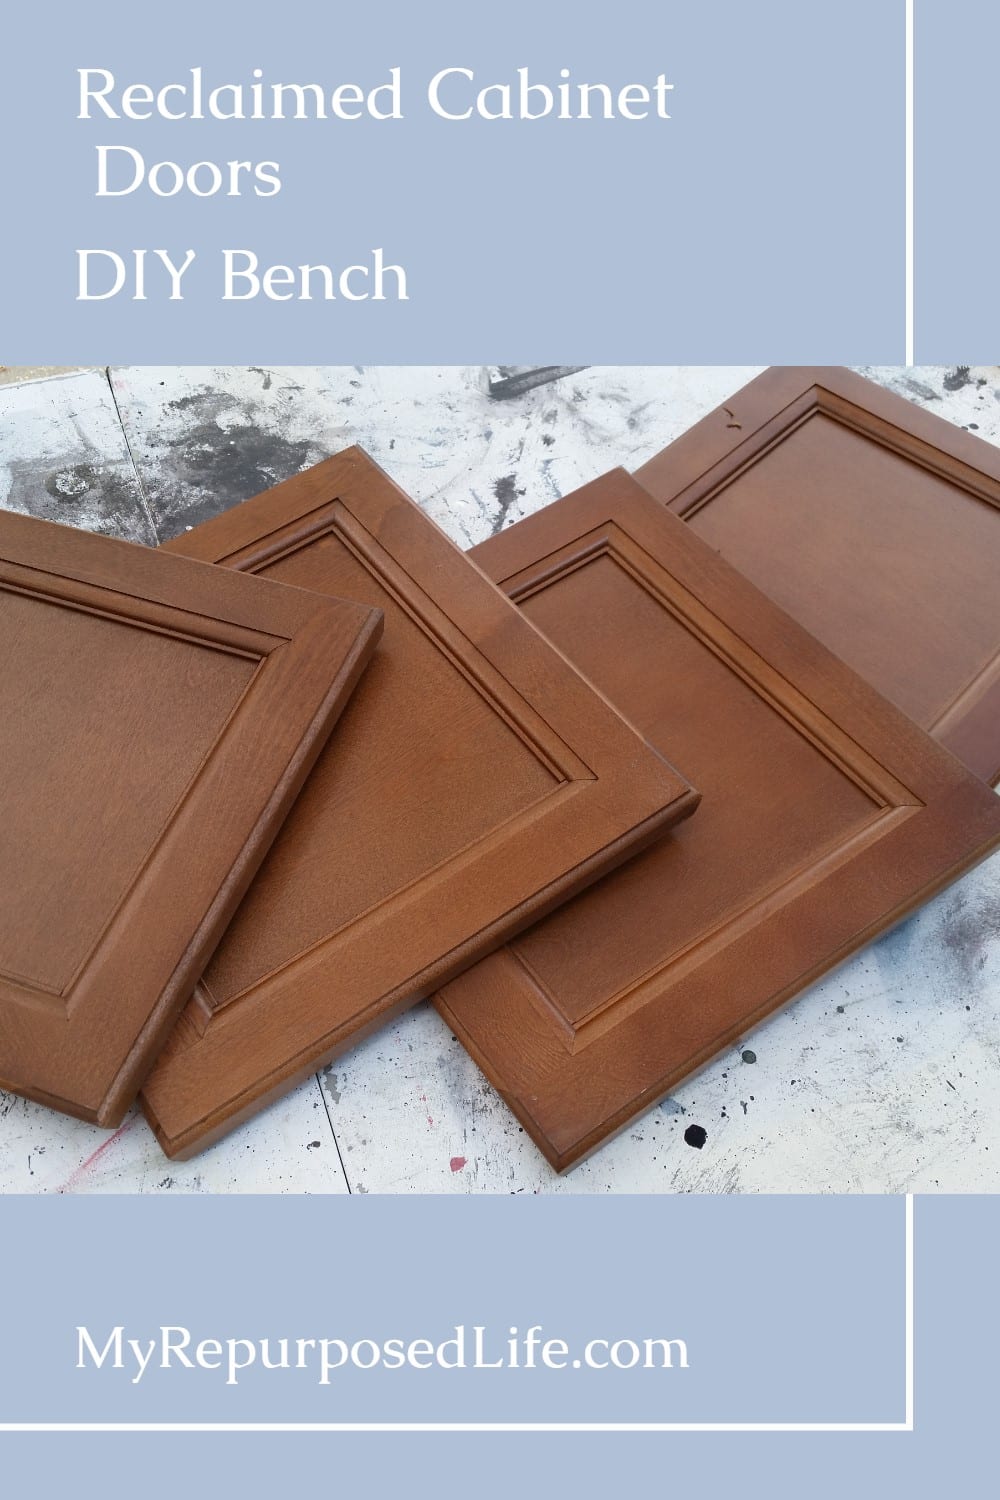 Making a cabinet door bench is easy with this step by step tutorial. Boxing in the cabinet doors is easy using scrap pieces. More scraps trim the bottom. Step by step directions included. #MyRepurposedLife #repurposed #cabinet #doors #bench via @repurposedlife